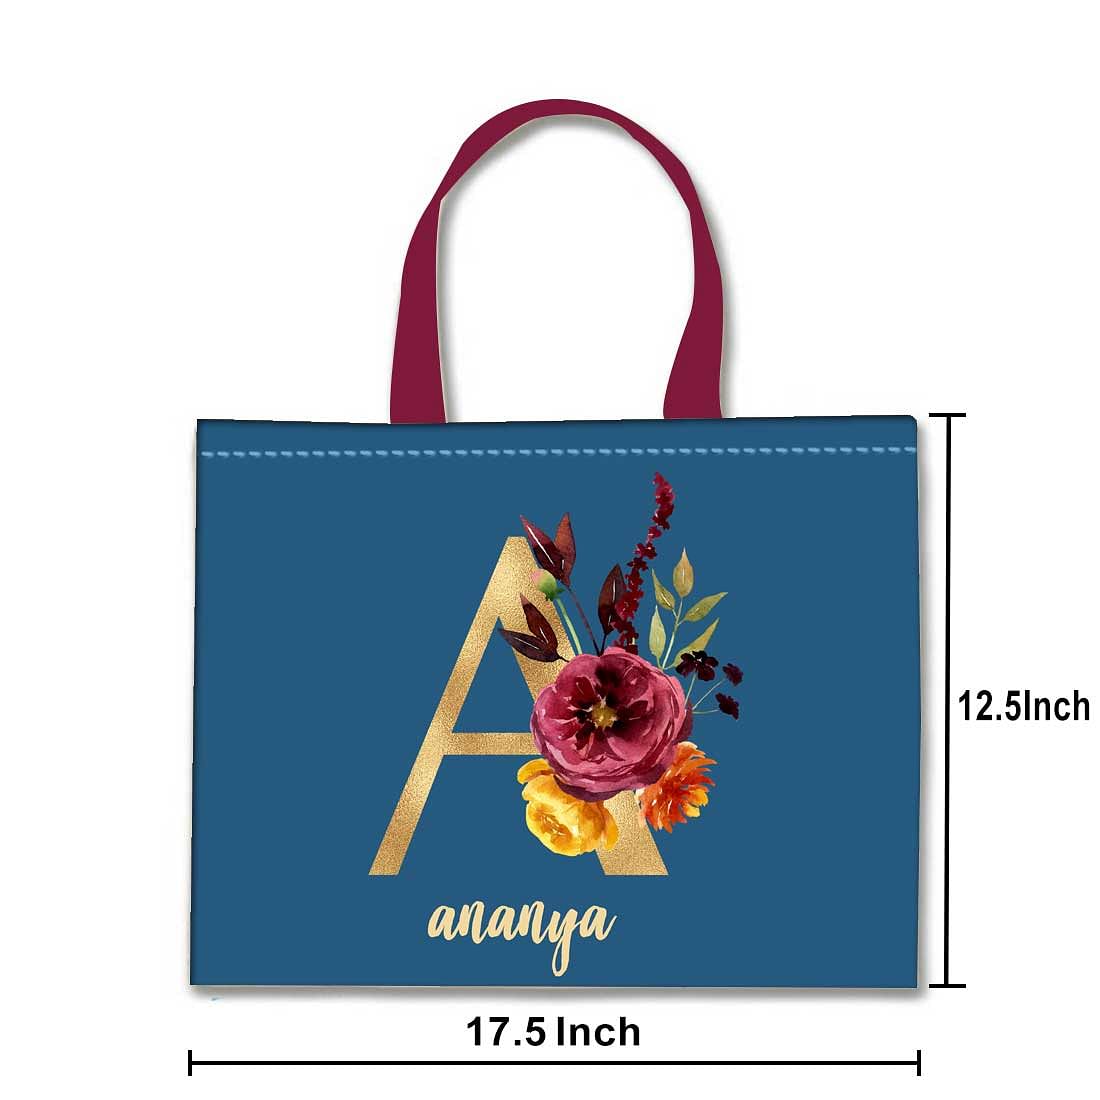 Nutcase Personalized Tote Bag for Women Gym Beach Travel Shopping Fashion Bags with Zip Closure and Internal Pocket to keep cash/valuables - Flower Nutcase